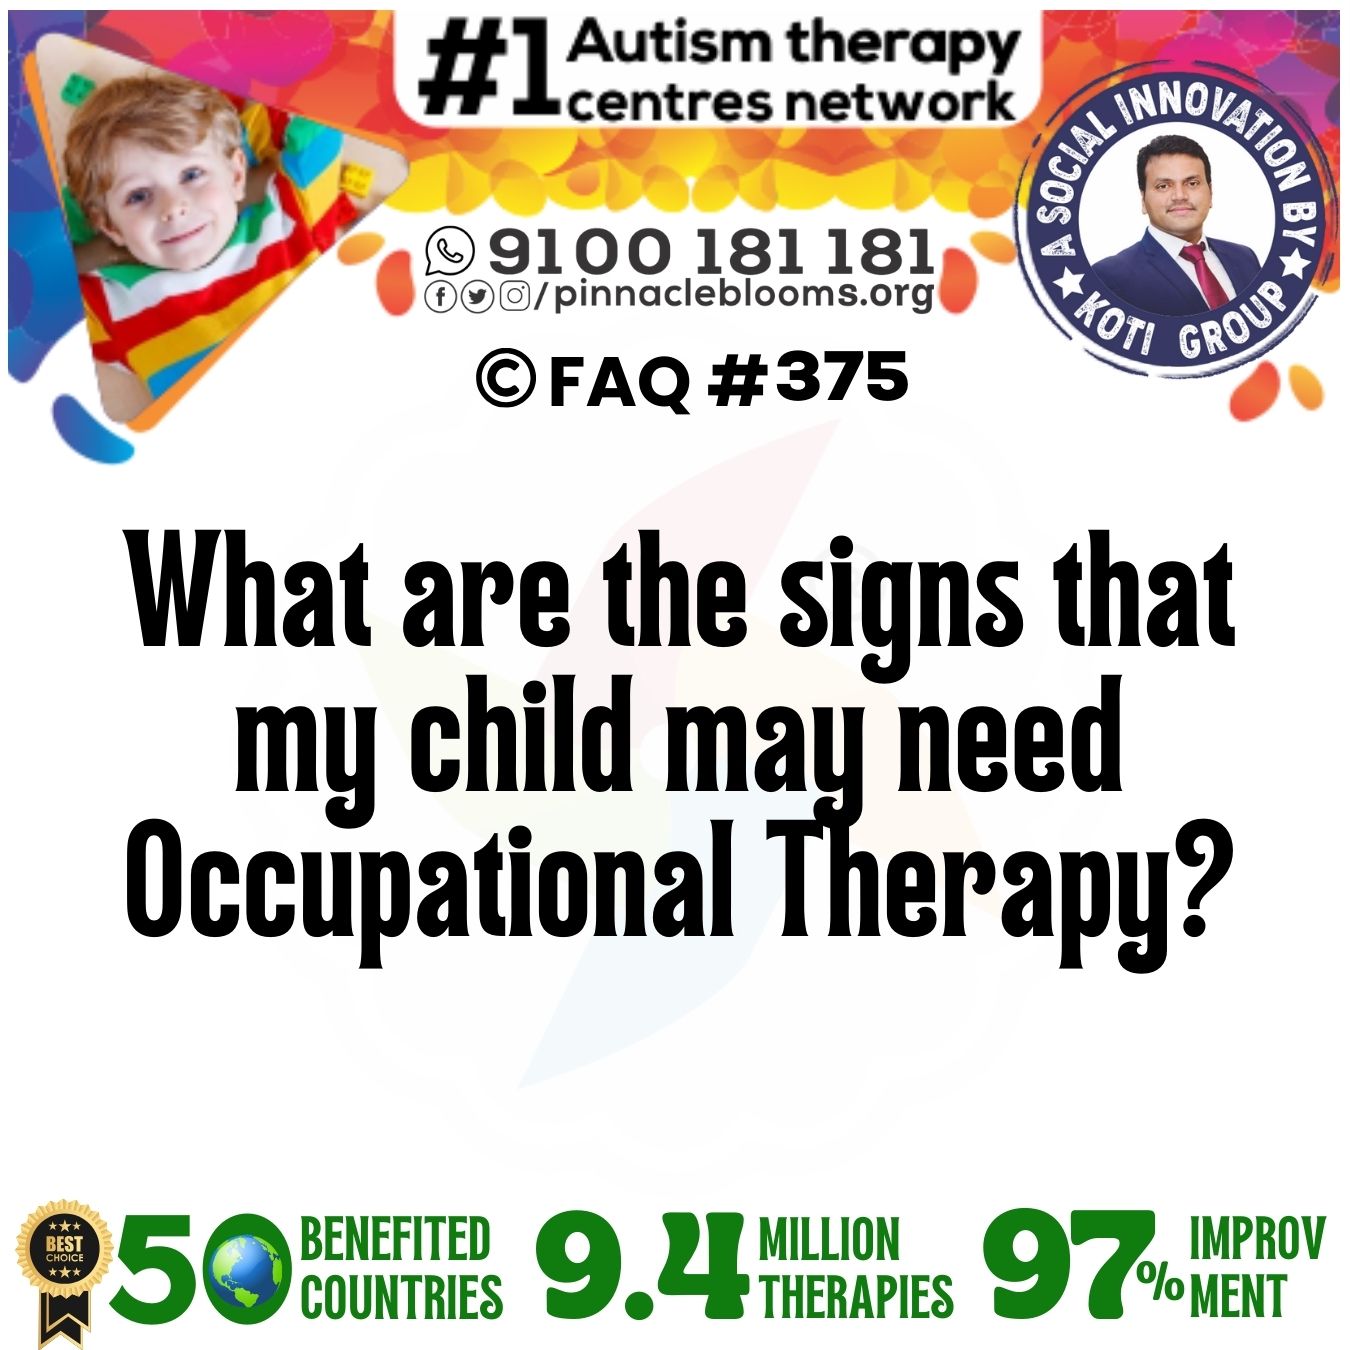 What are the signs that my child may need Occupational Therapy?